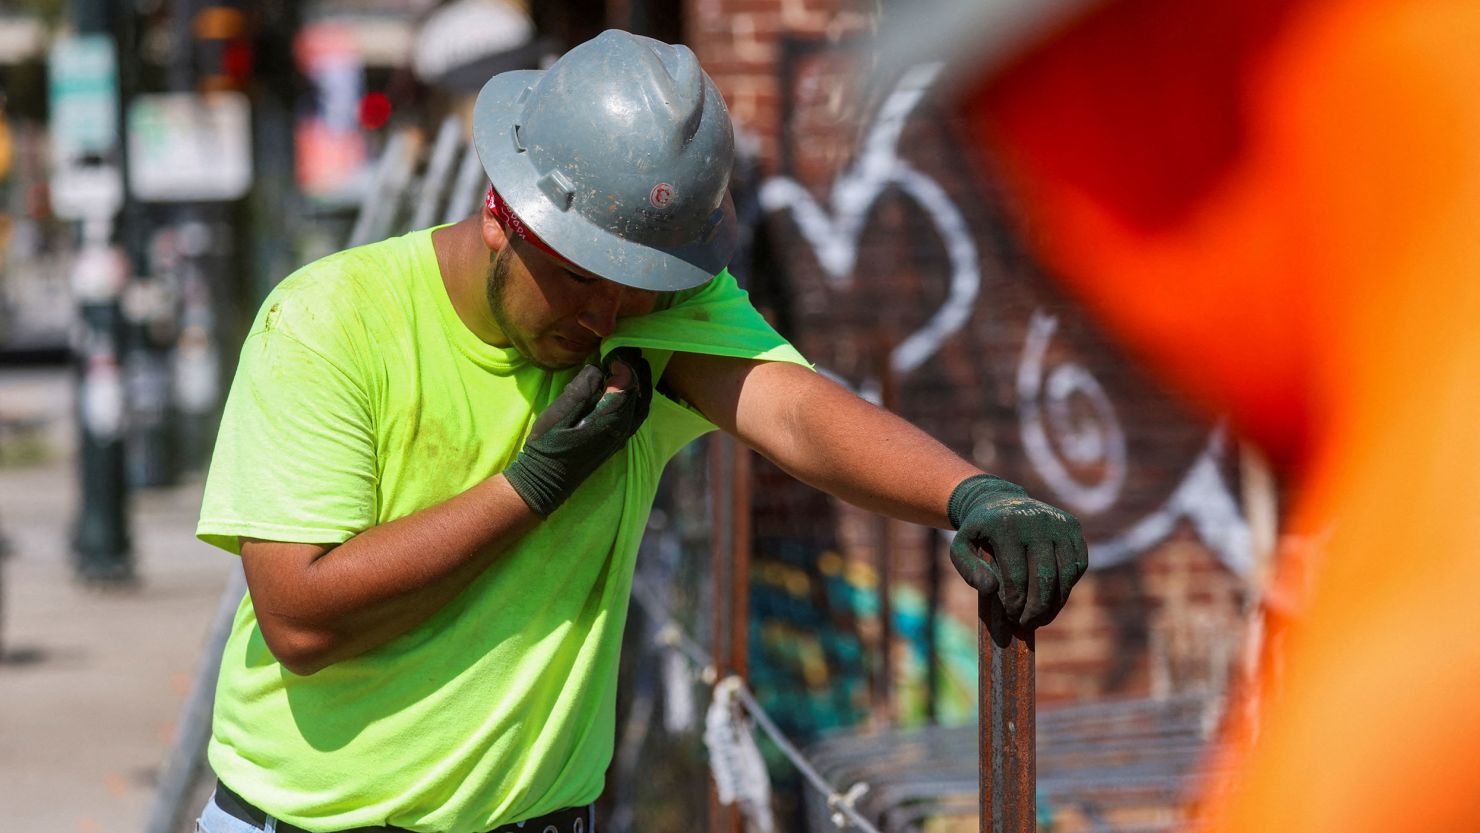 A construction worker wipes sweat from his face in high heat in Atlanta.